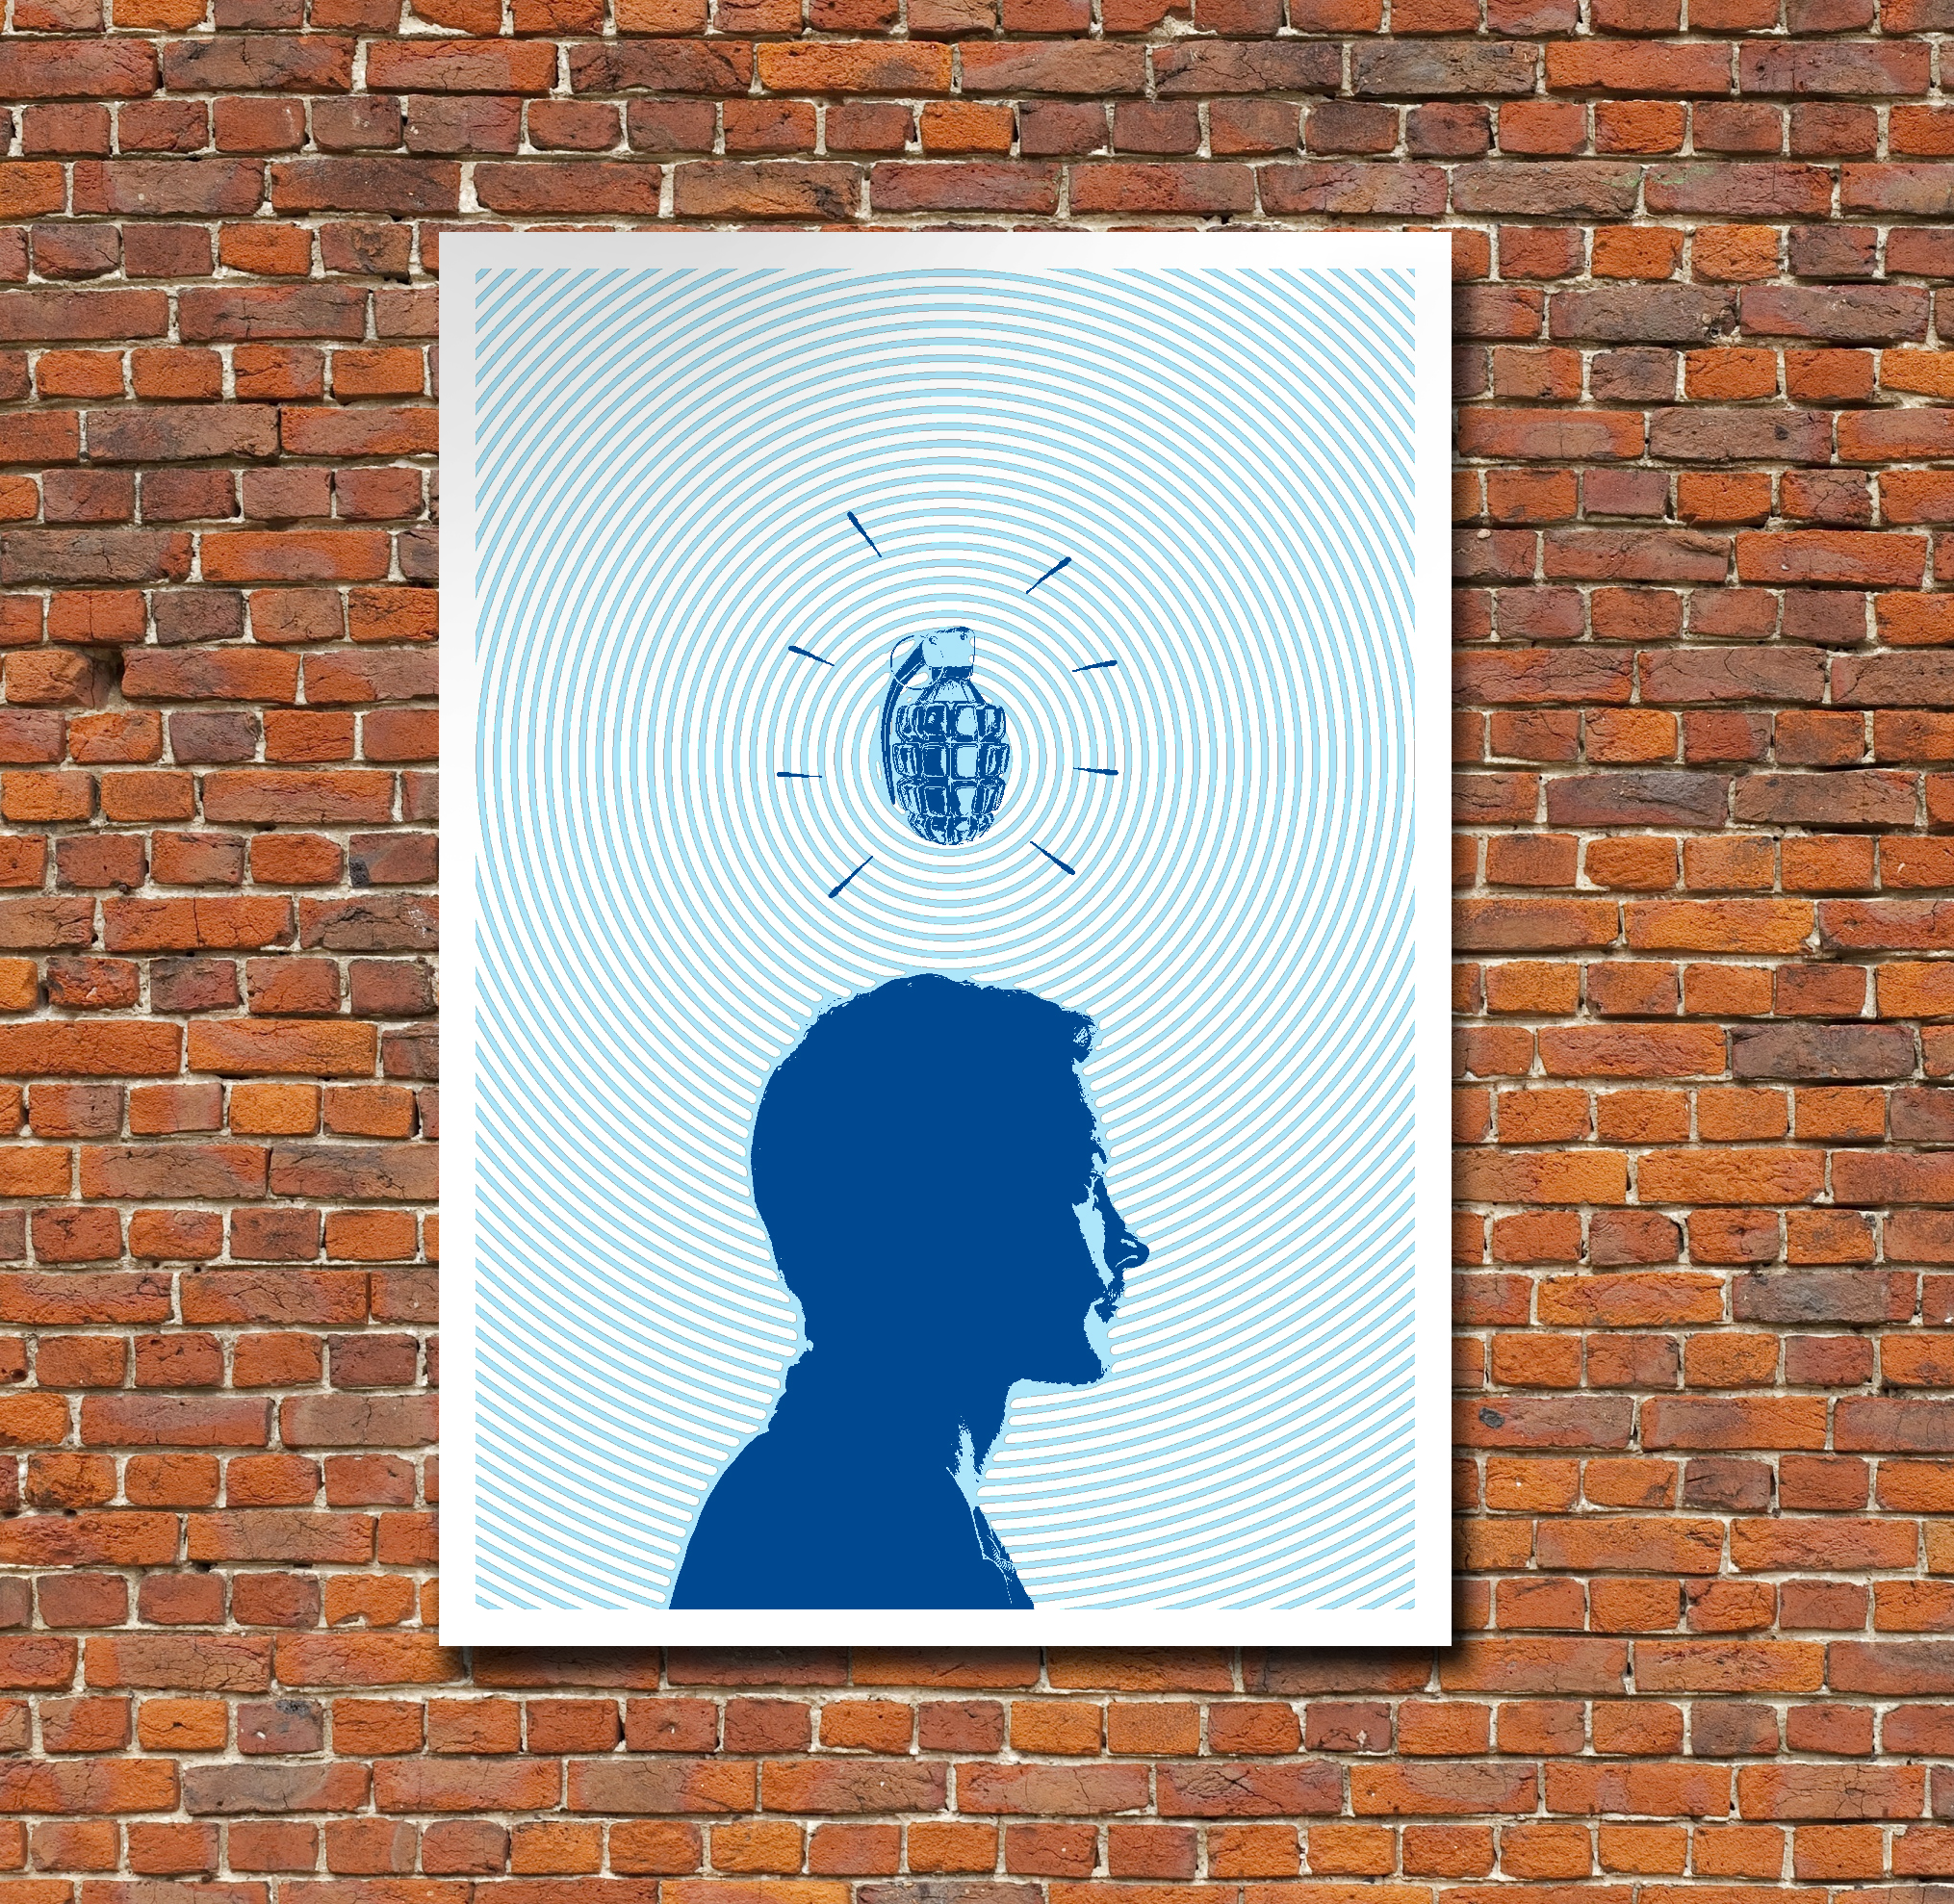  Ideas can be dangerous. This poster brings that to life.   Design/Illustration  